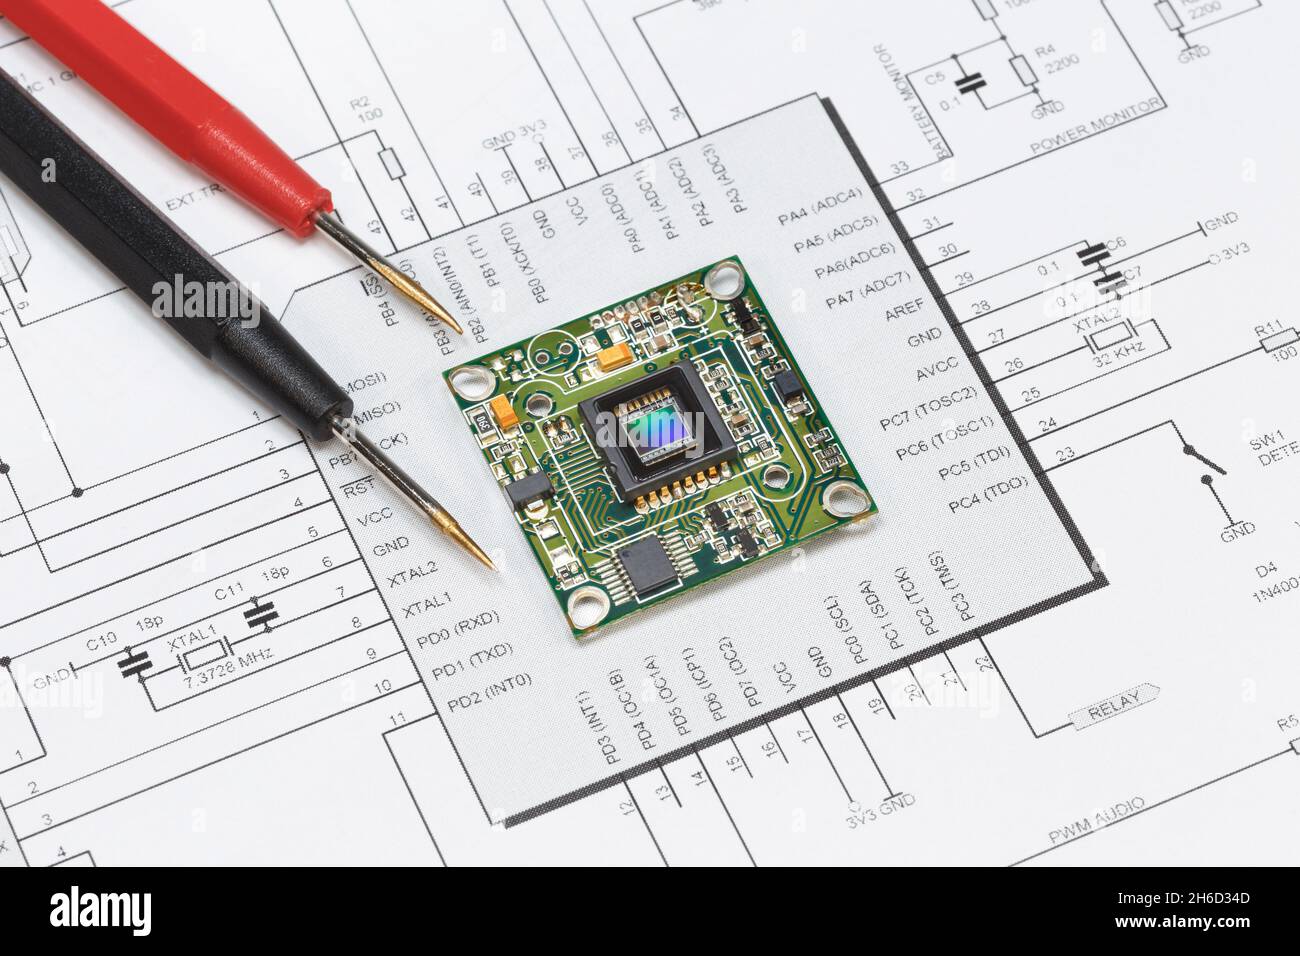 The module with the image sensor lies on the circuit diagram next to the tester probes. The concept of debugging, repairing electronic equipment Stock Photo